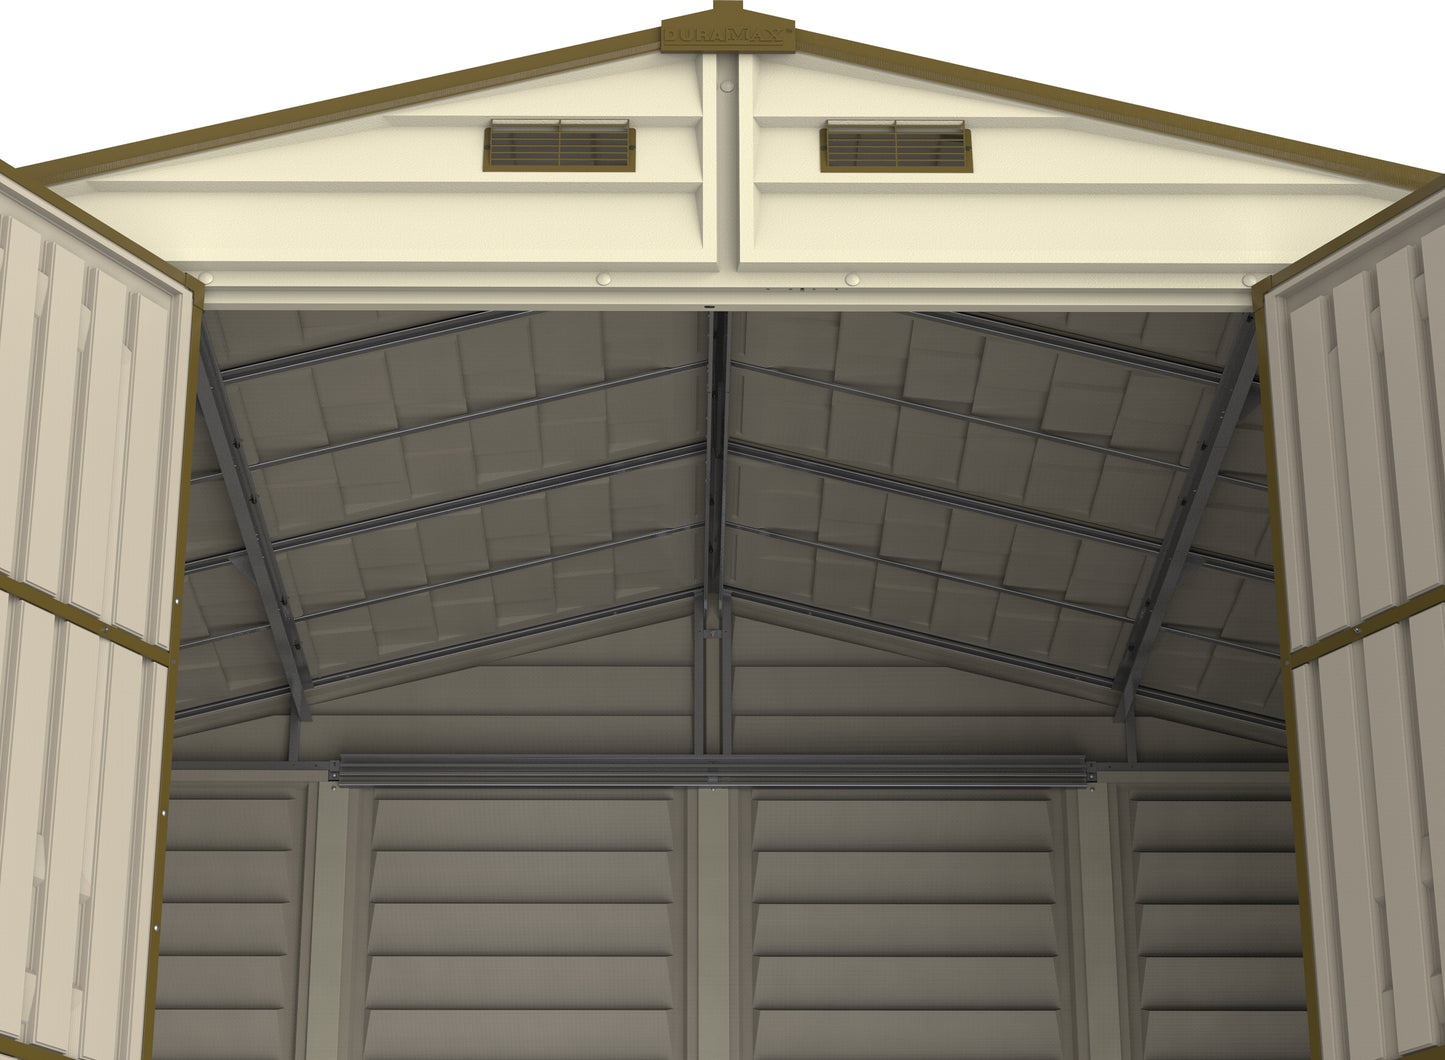 Plastic woodside storage shed with wall panels made from durable vinyl to avoid rot and dent.